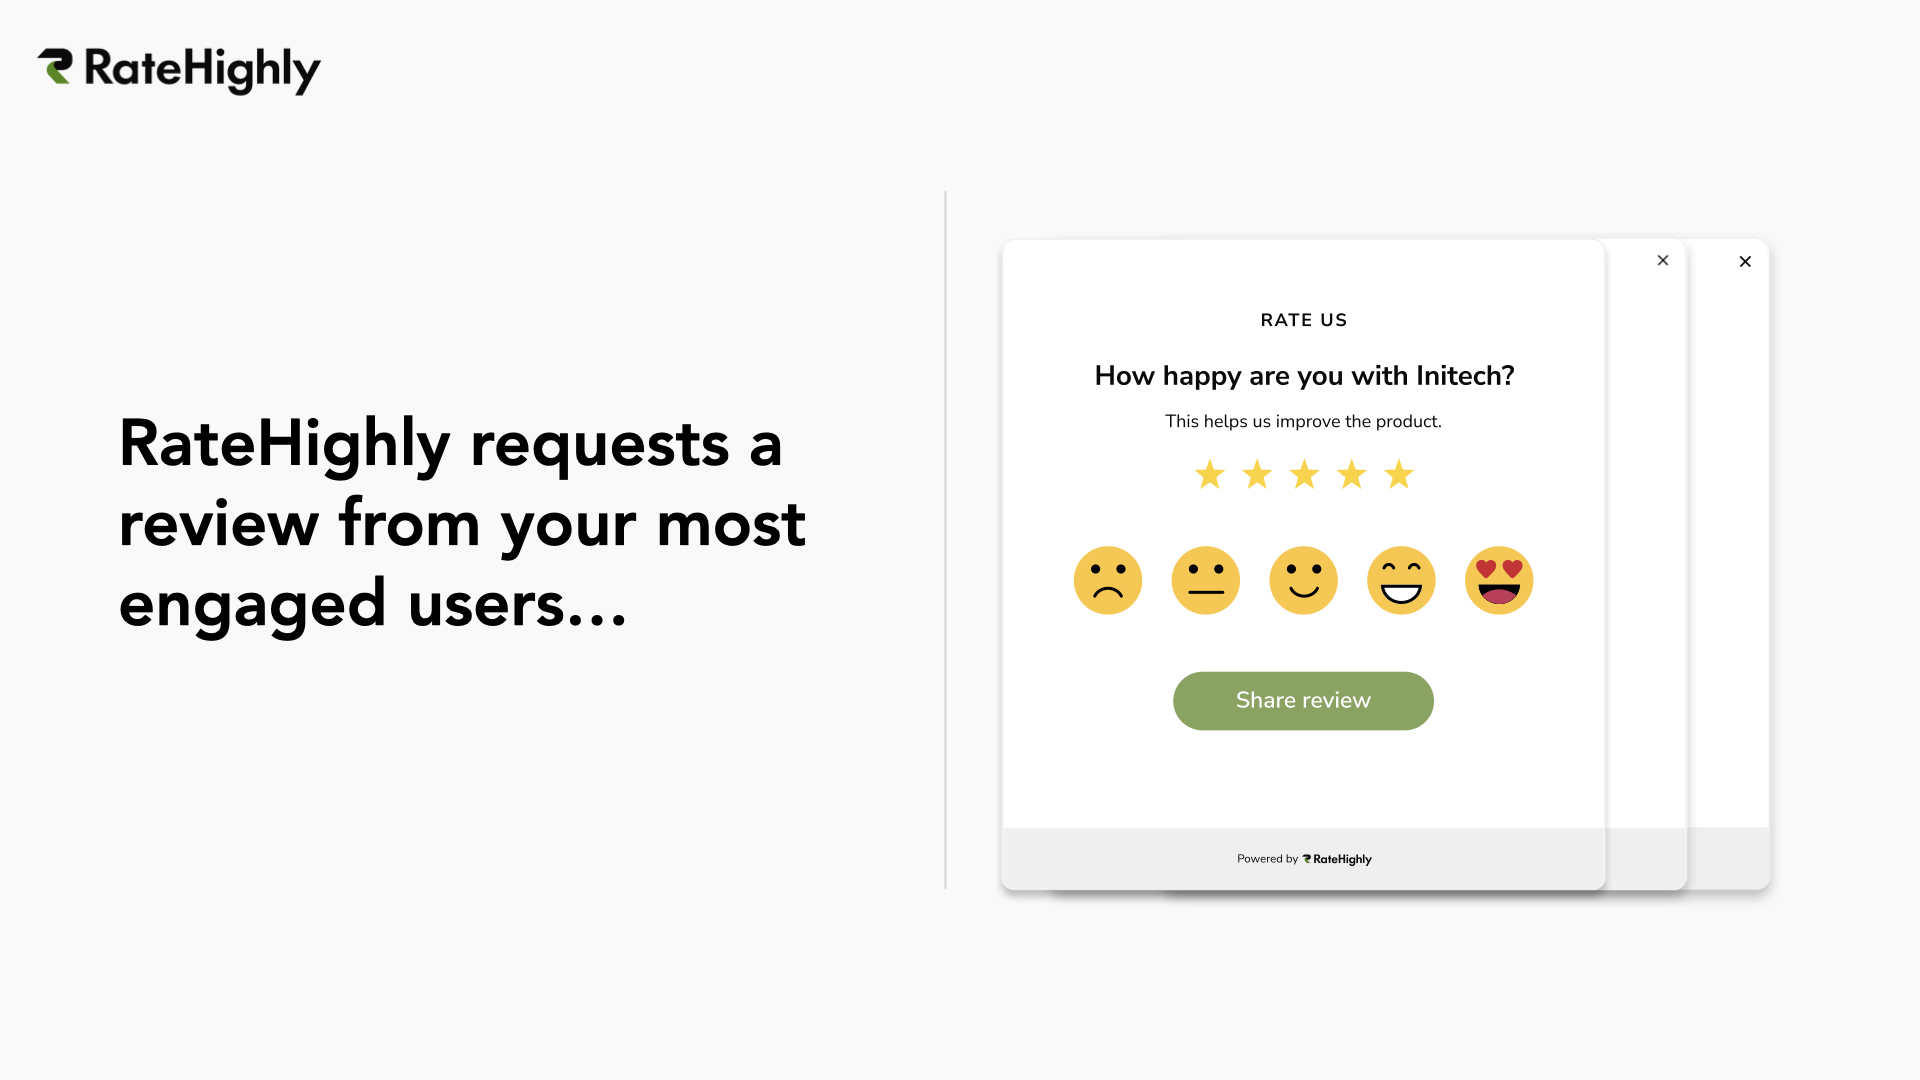 RateHighly requests a review your most engaged users